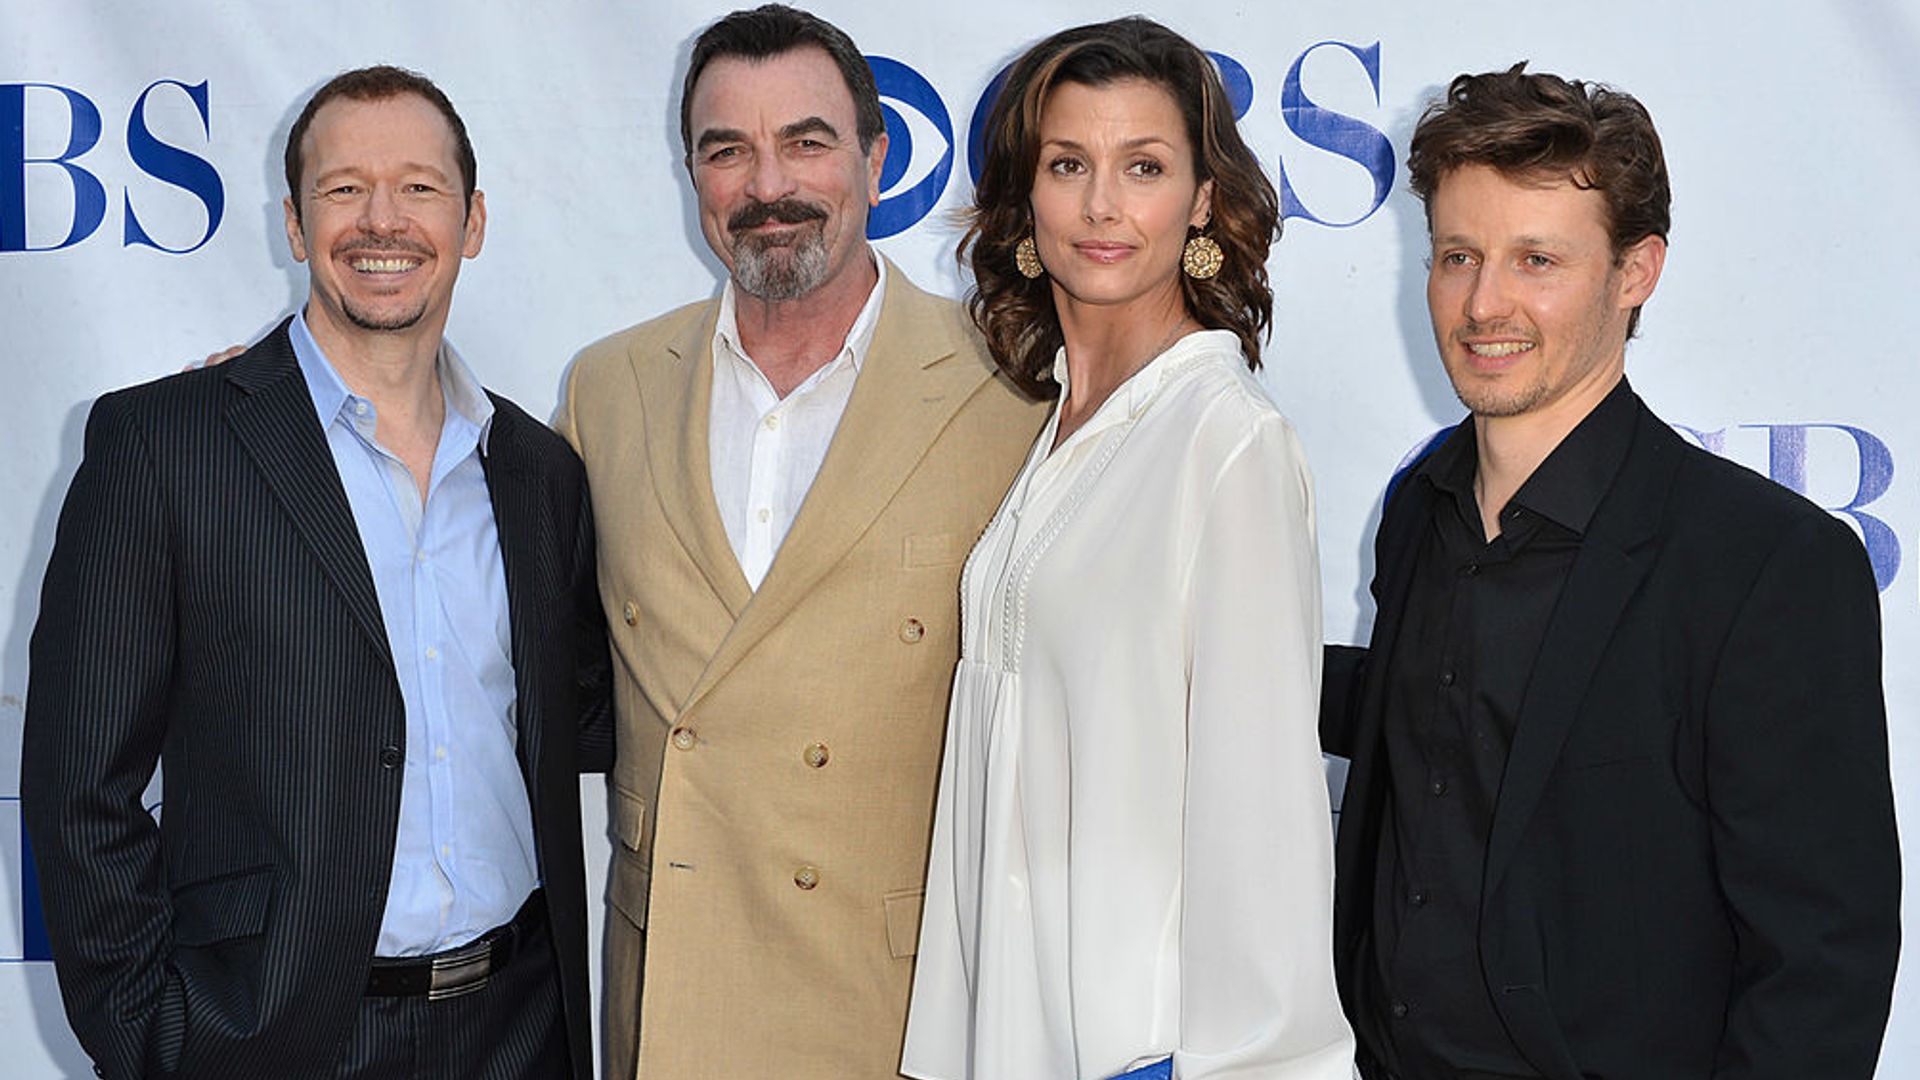 Actors Donnie Wahlberg, Tom Selleck, Bridget Moynahan and Will Estes arrive to a screening and panel discussion of CBS's "Blue Bloods" at Leonard H. Goldenson Theatre on June 5, 2012